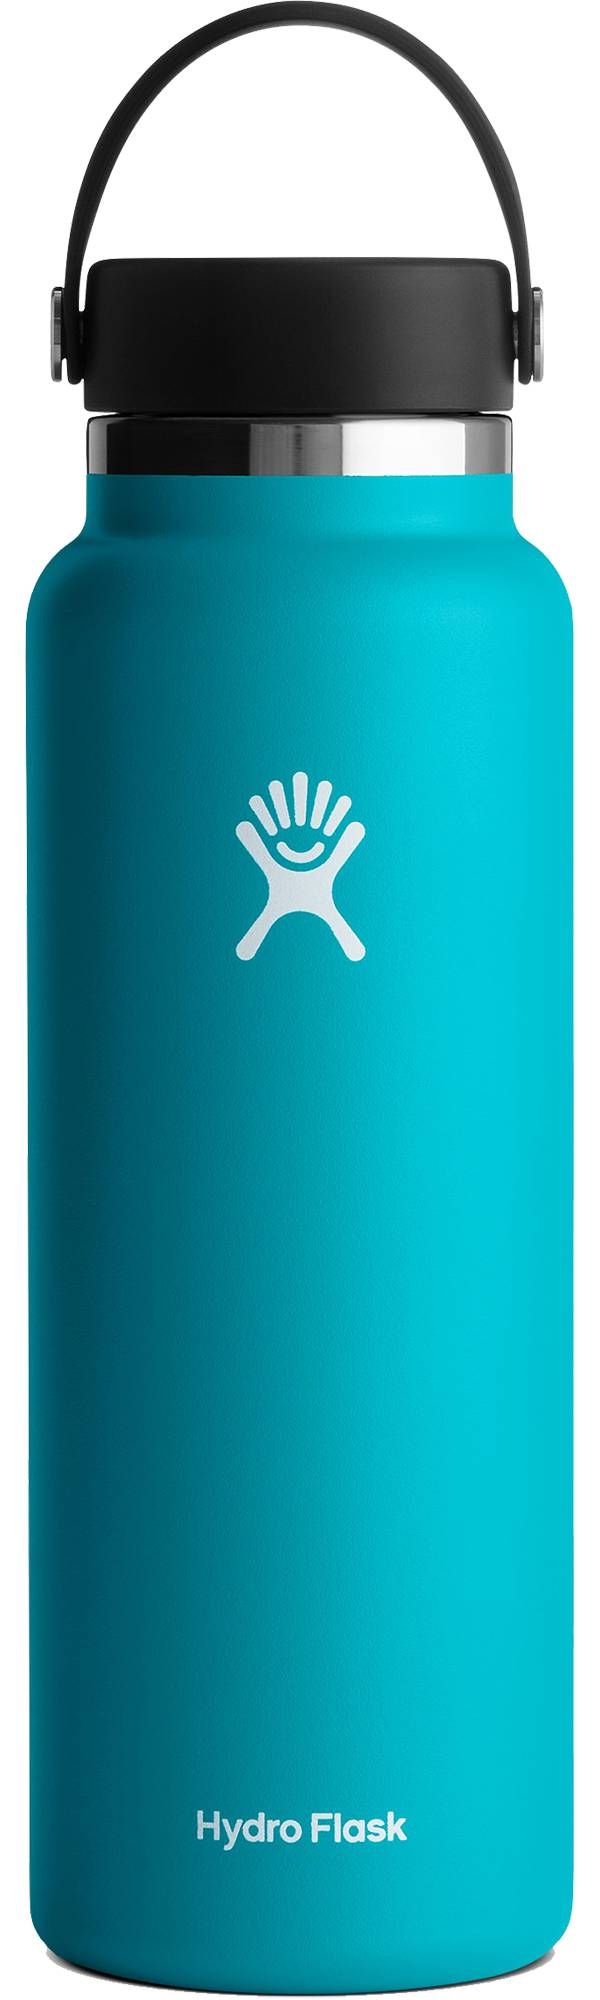 Hydro Flask Wide Mouth 40 oz. Bottle - New Style | 25% Off at DICK'S | Dick's Sporting Goods